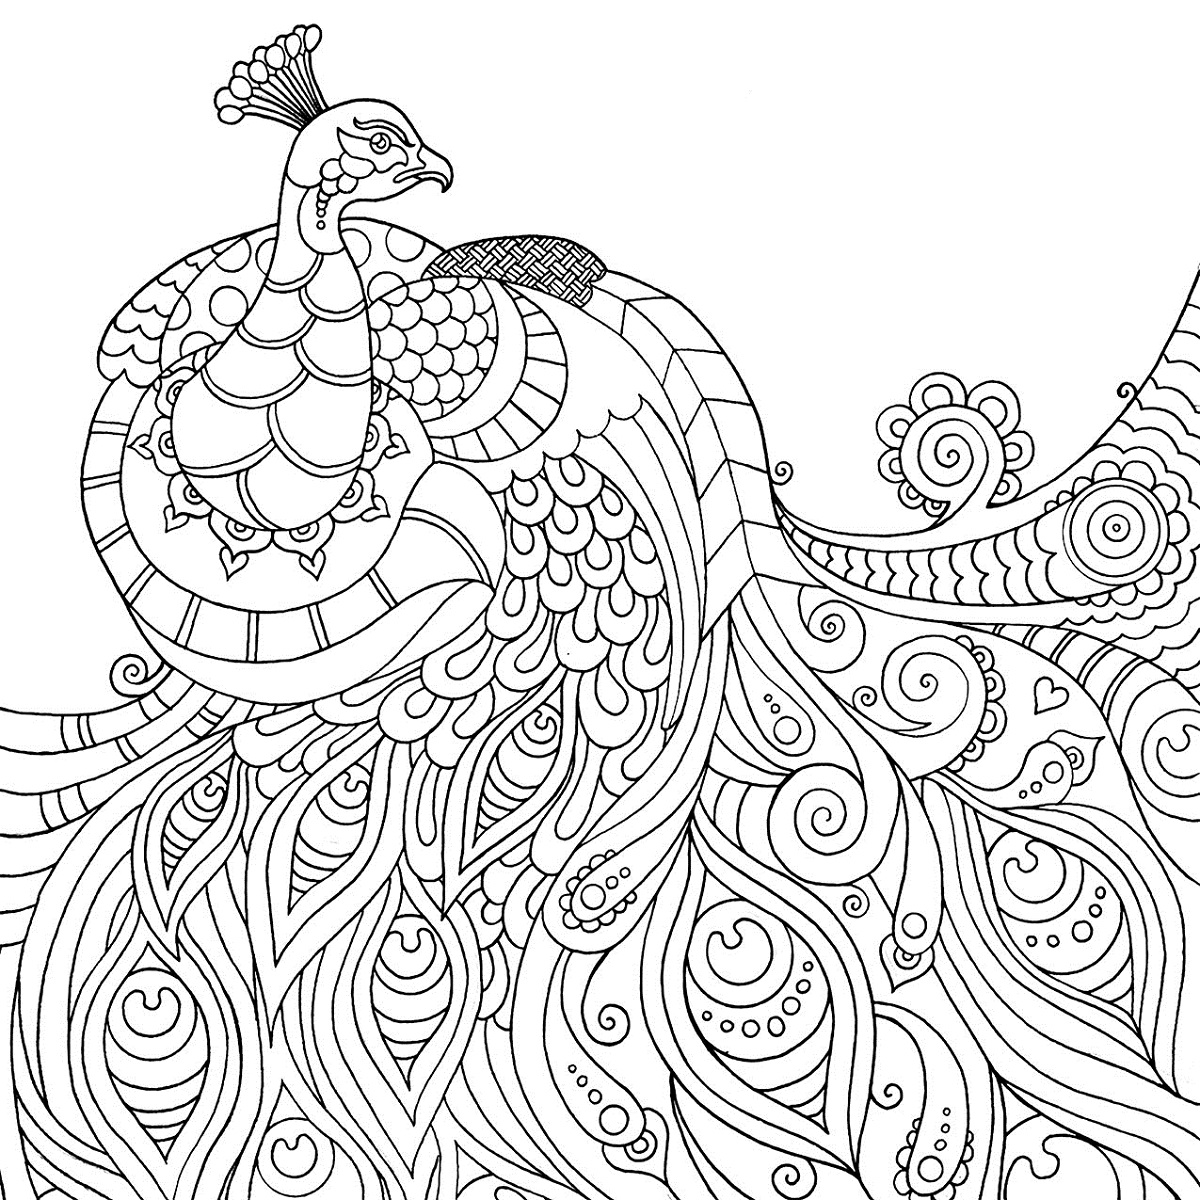 free-mindfulness-coloring-pages-at-getdrawings-free-download